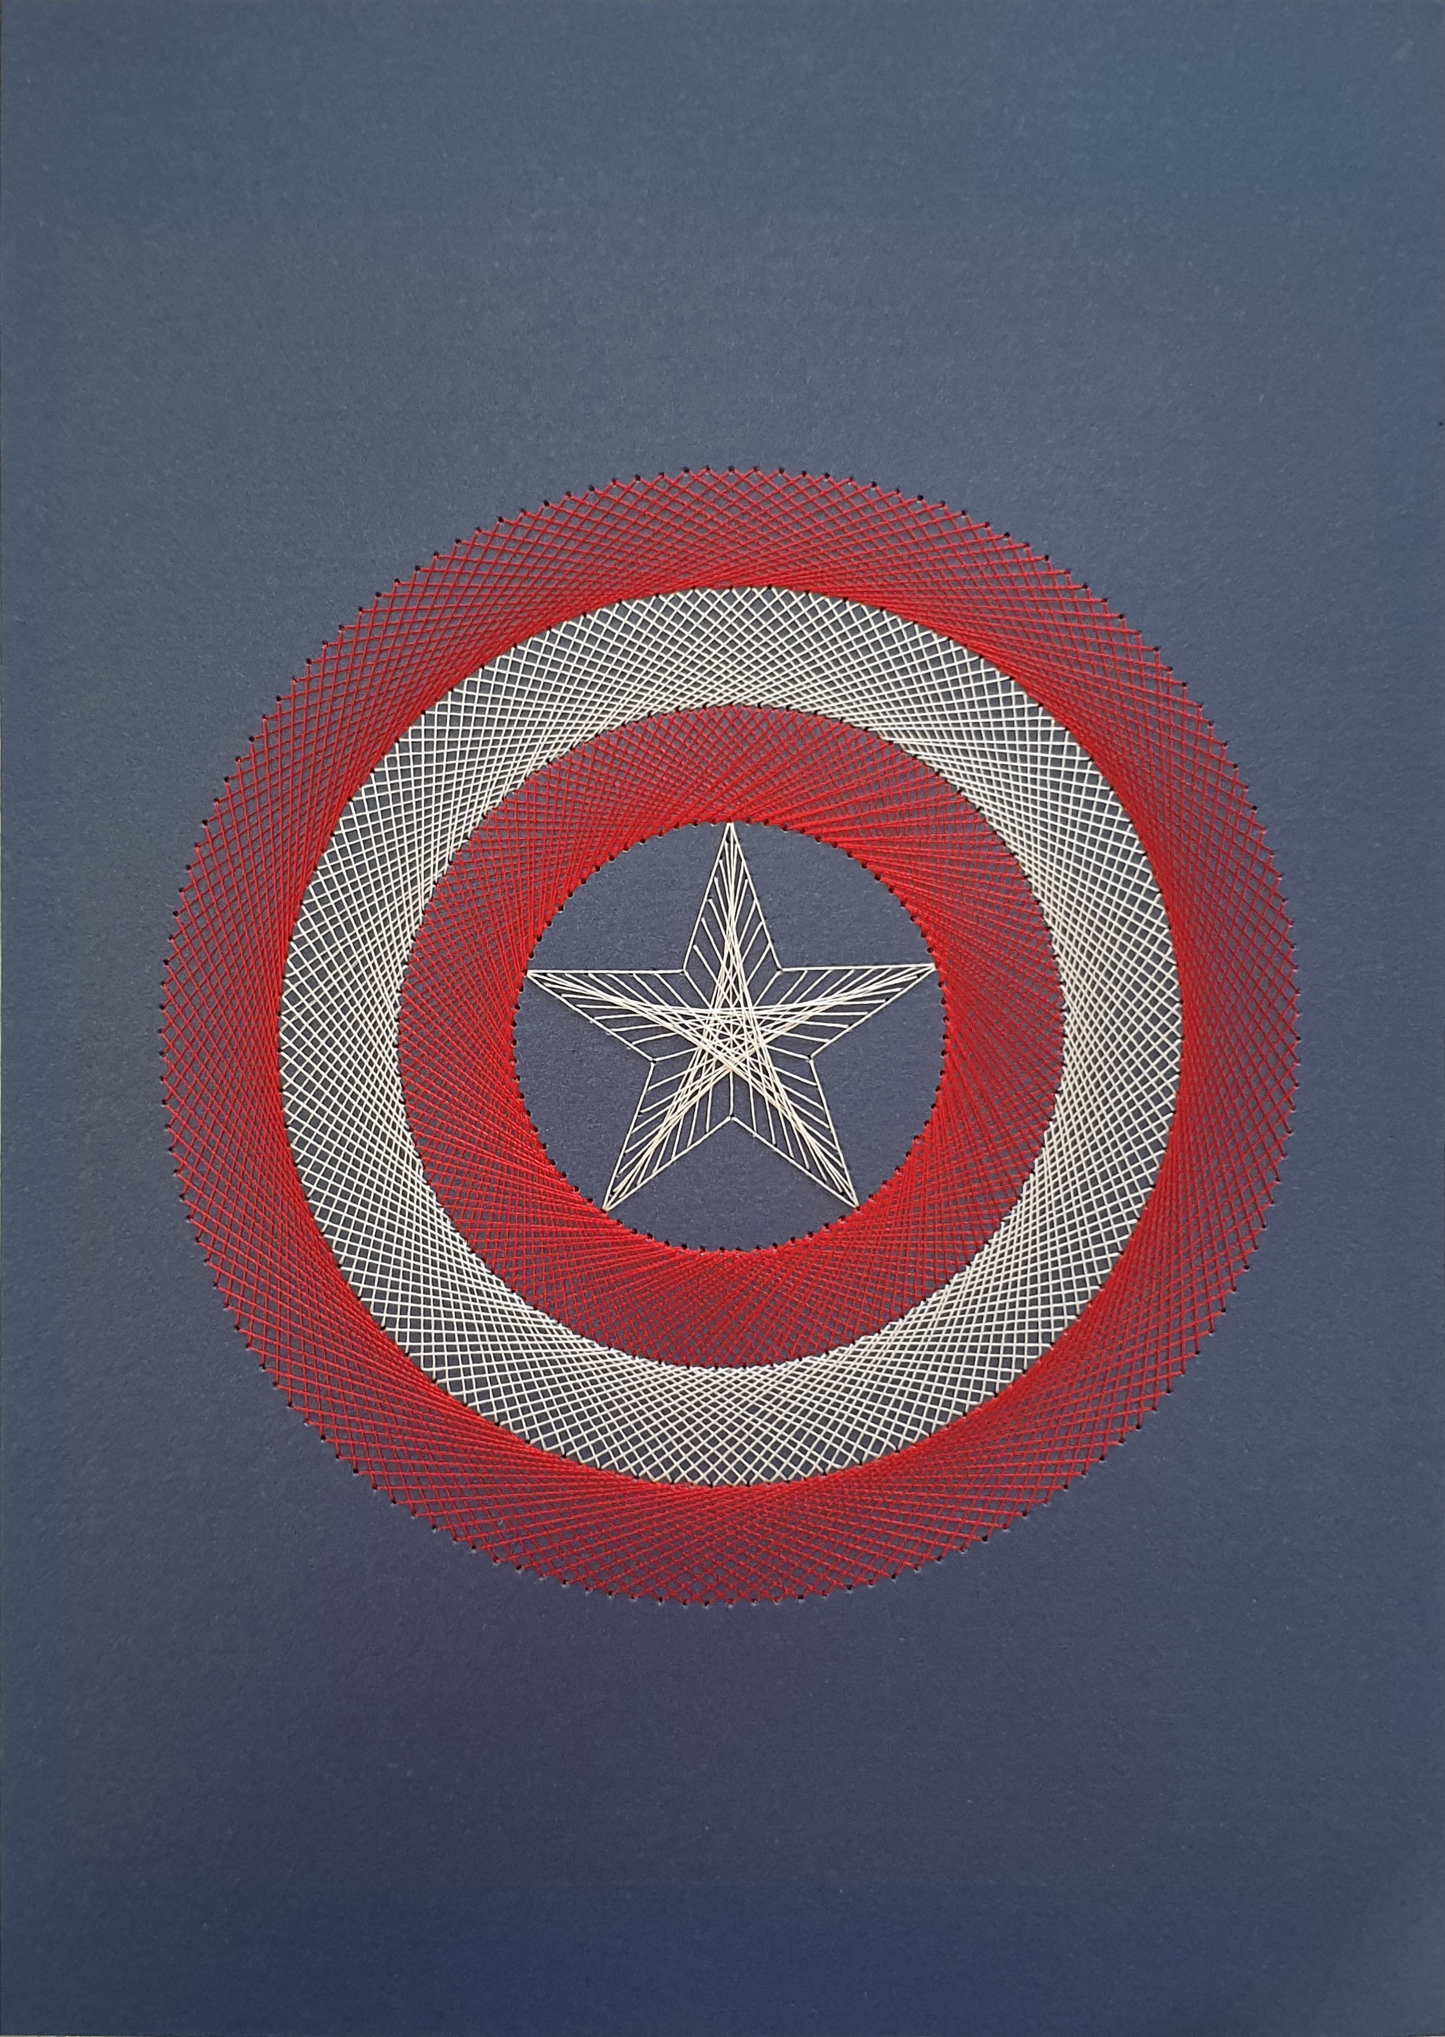 Capt America Inspired Card Embroidery Kit (Blue Card)